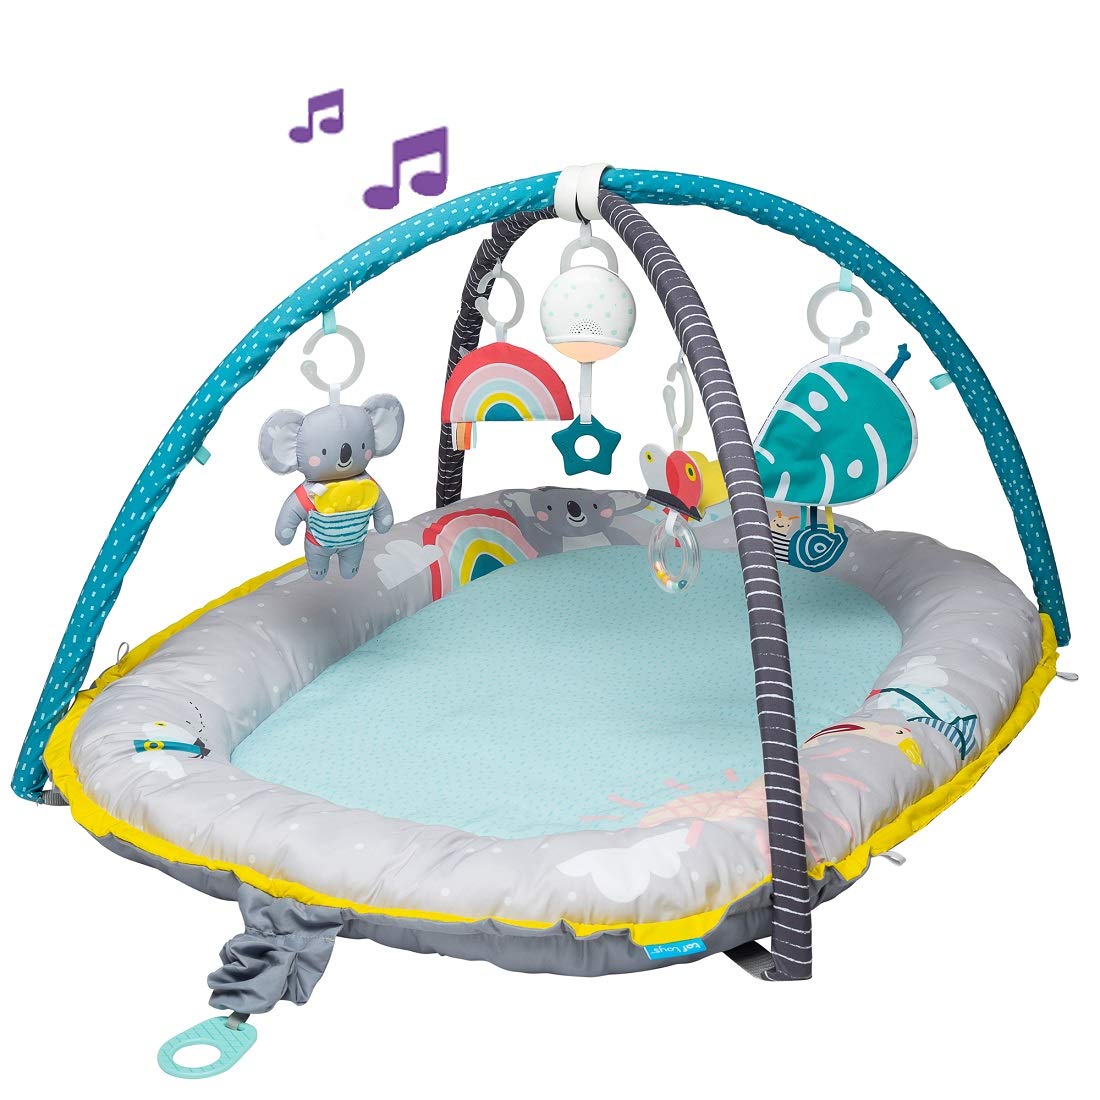 Taf Toys 4 in 1 Music Light Thickly Padded Koala Musical Cozy Gym Baby nest Interactive Baby Mat. Baby’s Activity Entertainment Center for Easier Development and Easier Parenting